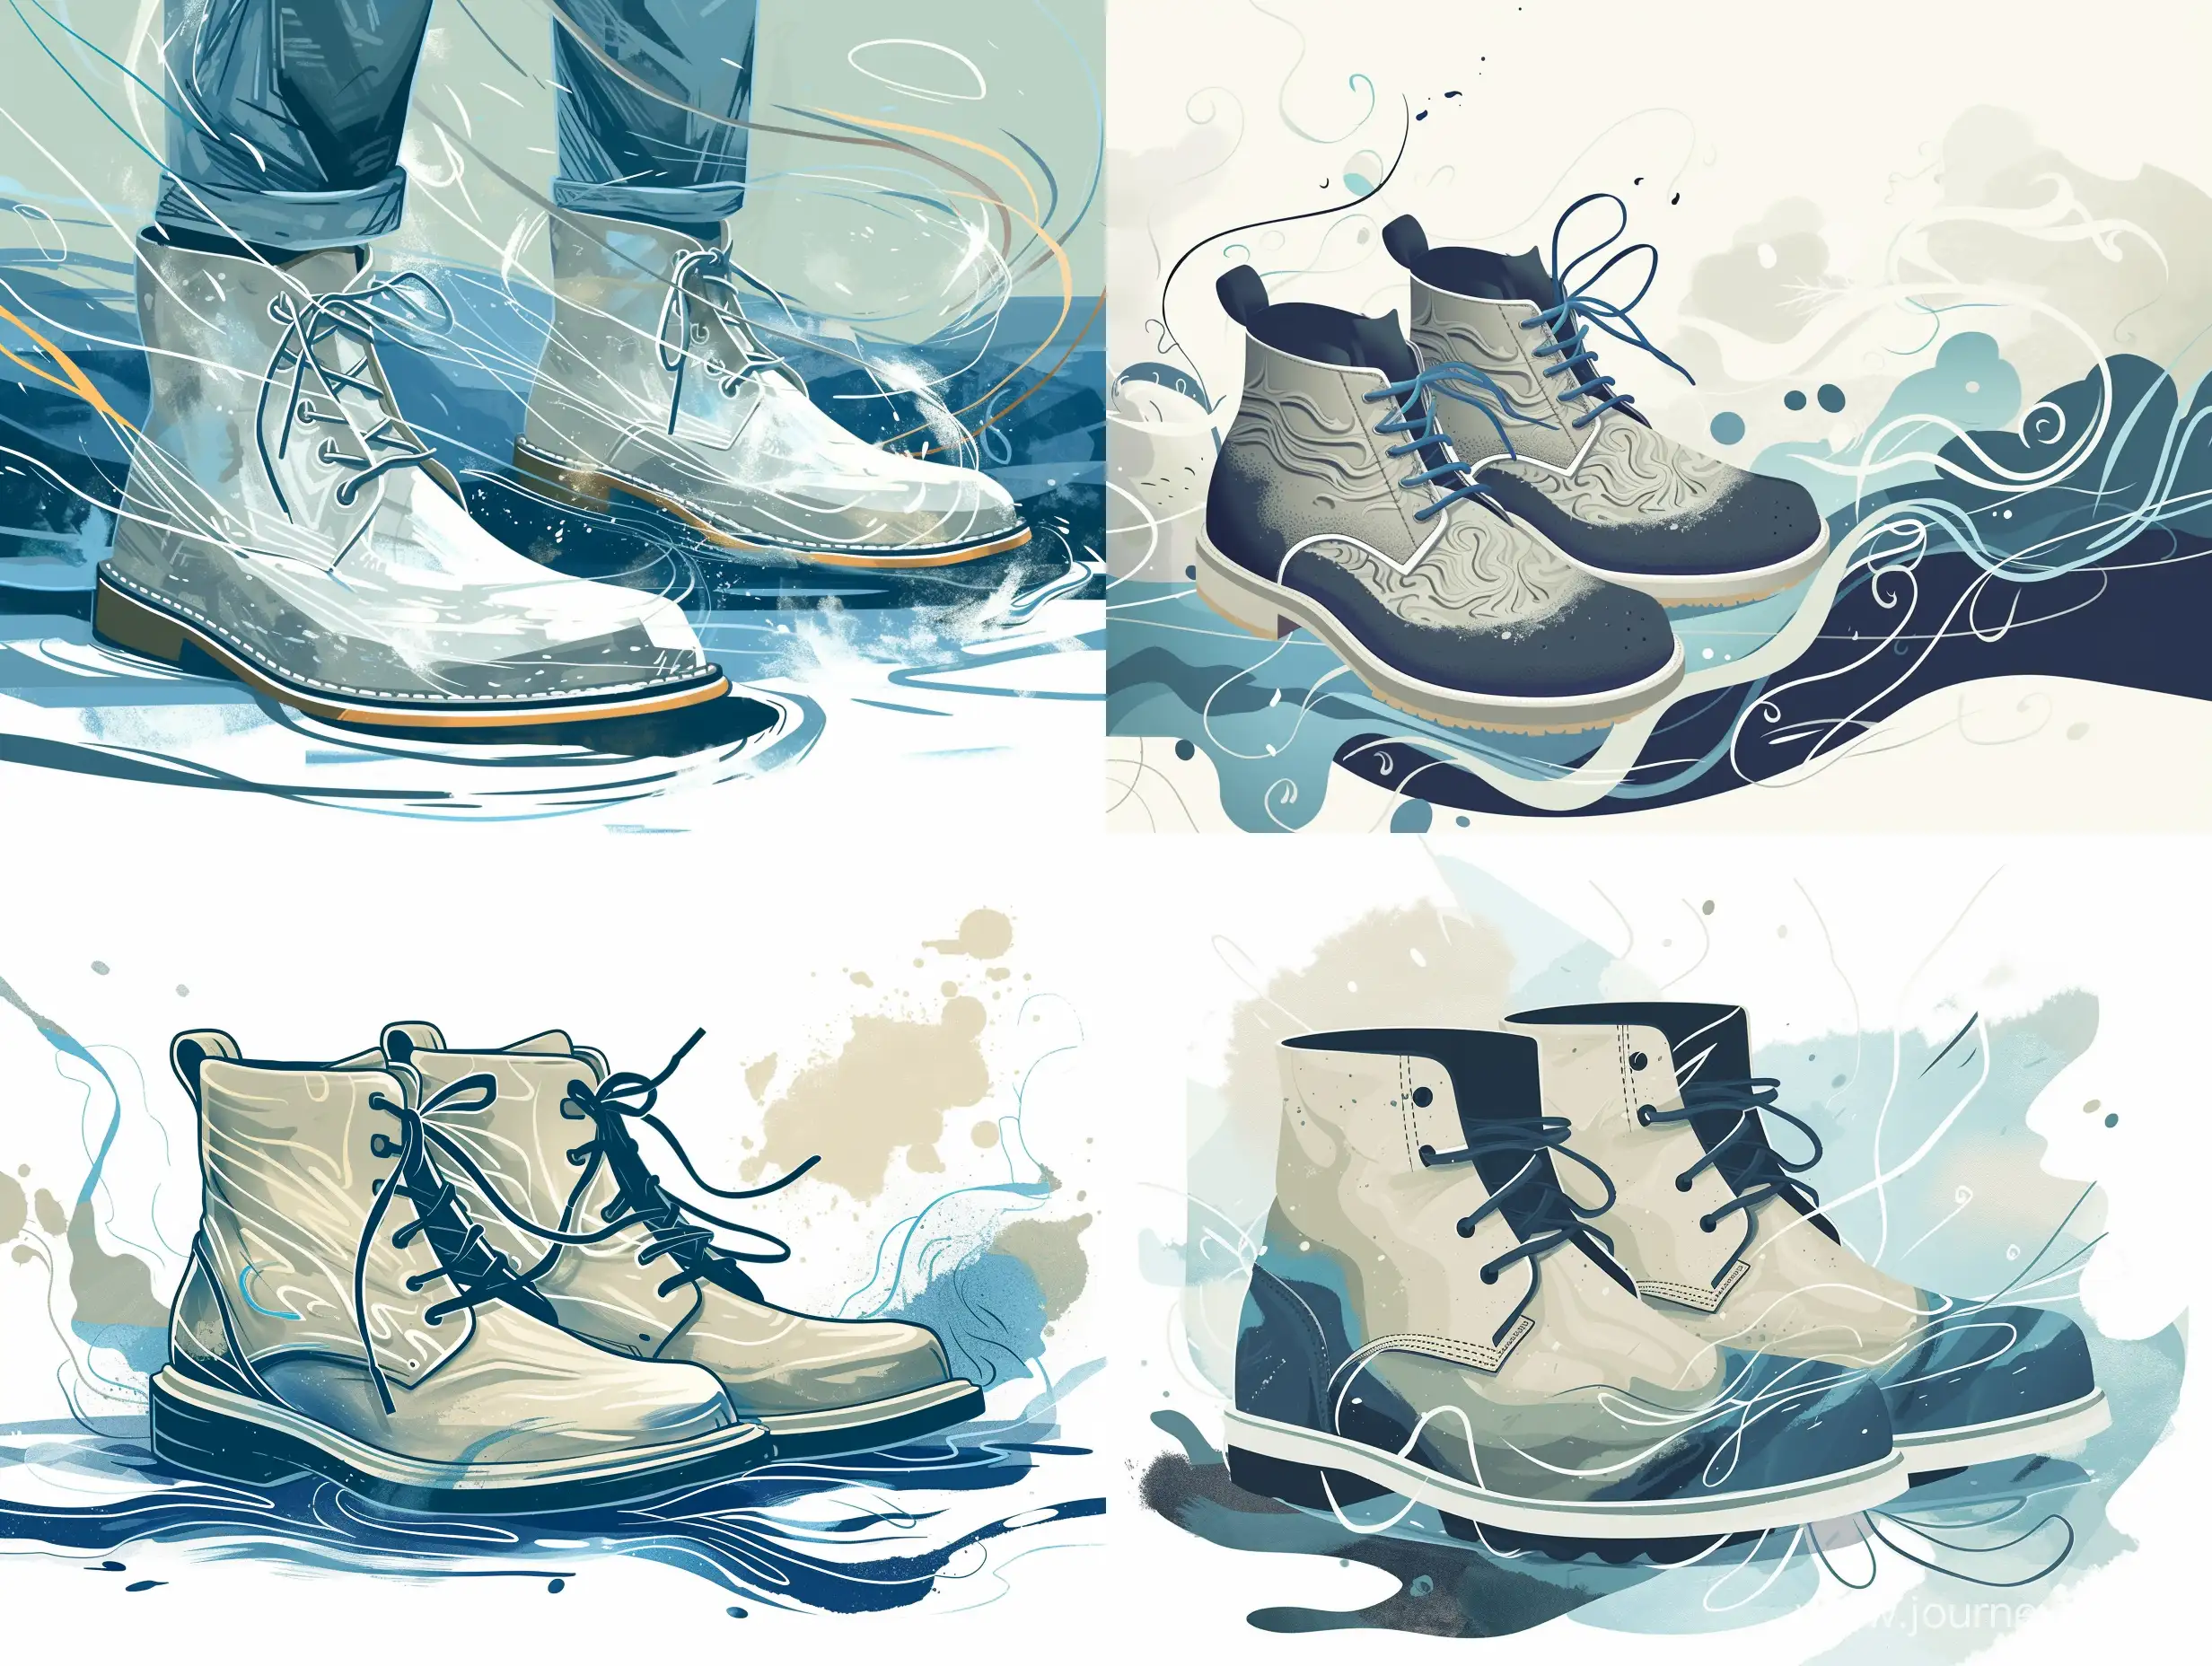 Create an abstract illustration for a pair of winter chukka boots inspired by Boreas, the god of wind and winter. Focus on capturing the essence of movement and the icy, brisk feel of winter through a simple and abstract design. Use a limited color palette that reflects the cool tones associated with winter, such as deep blues, icy grays, and subtle whites. Incorporate swirling patterns or dynamic lines to evoke the sense of wind in motion. Ensure that the design remains clean and minimalist, avoiding any literal representations of the god or human elements. Let the abstract forms and colors convey the atmospheric and elemental qualities inspired by Boreas.